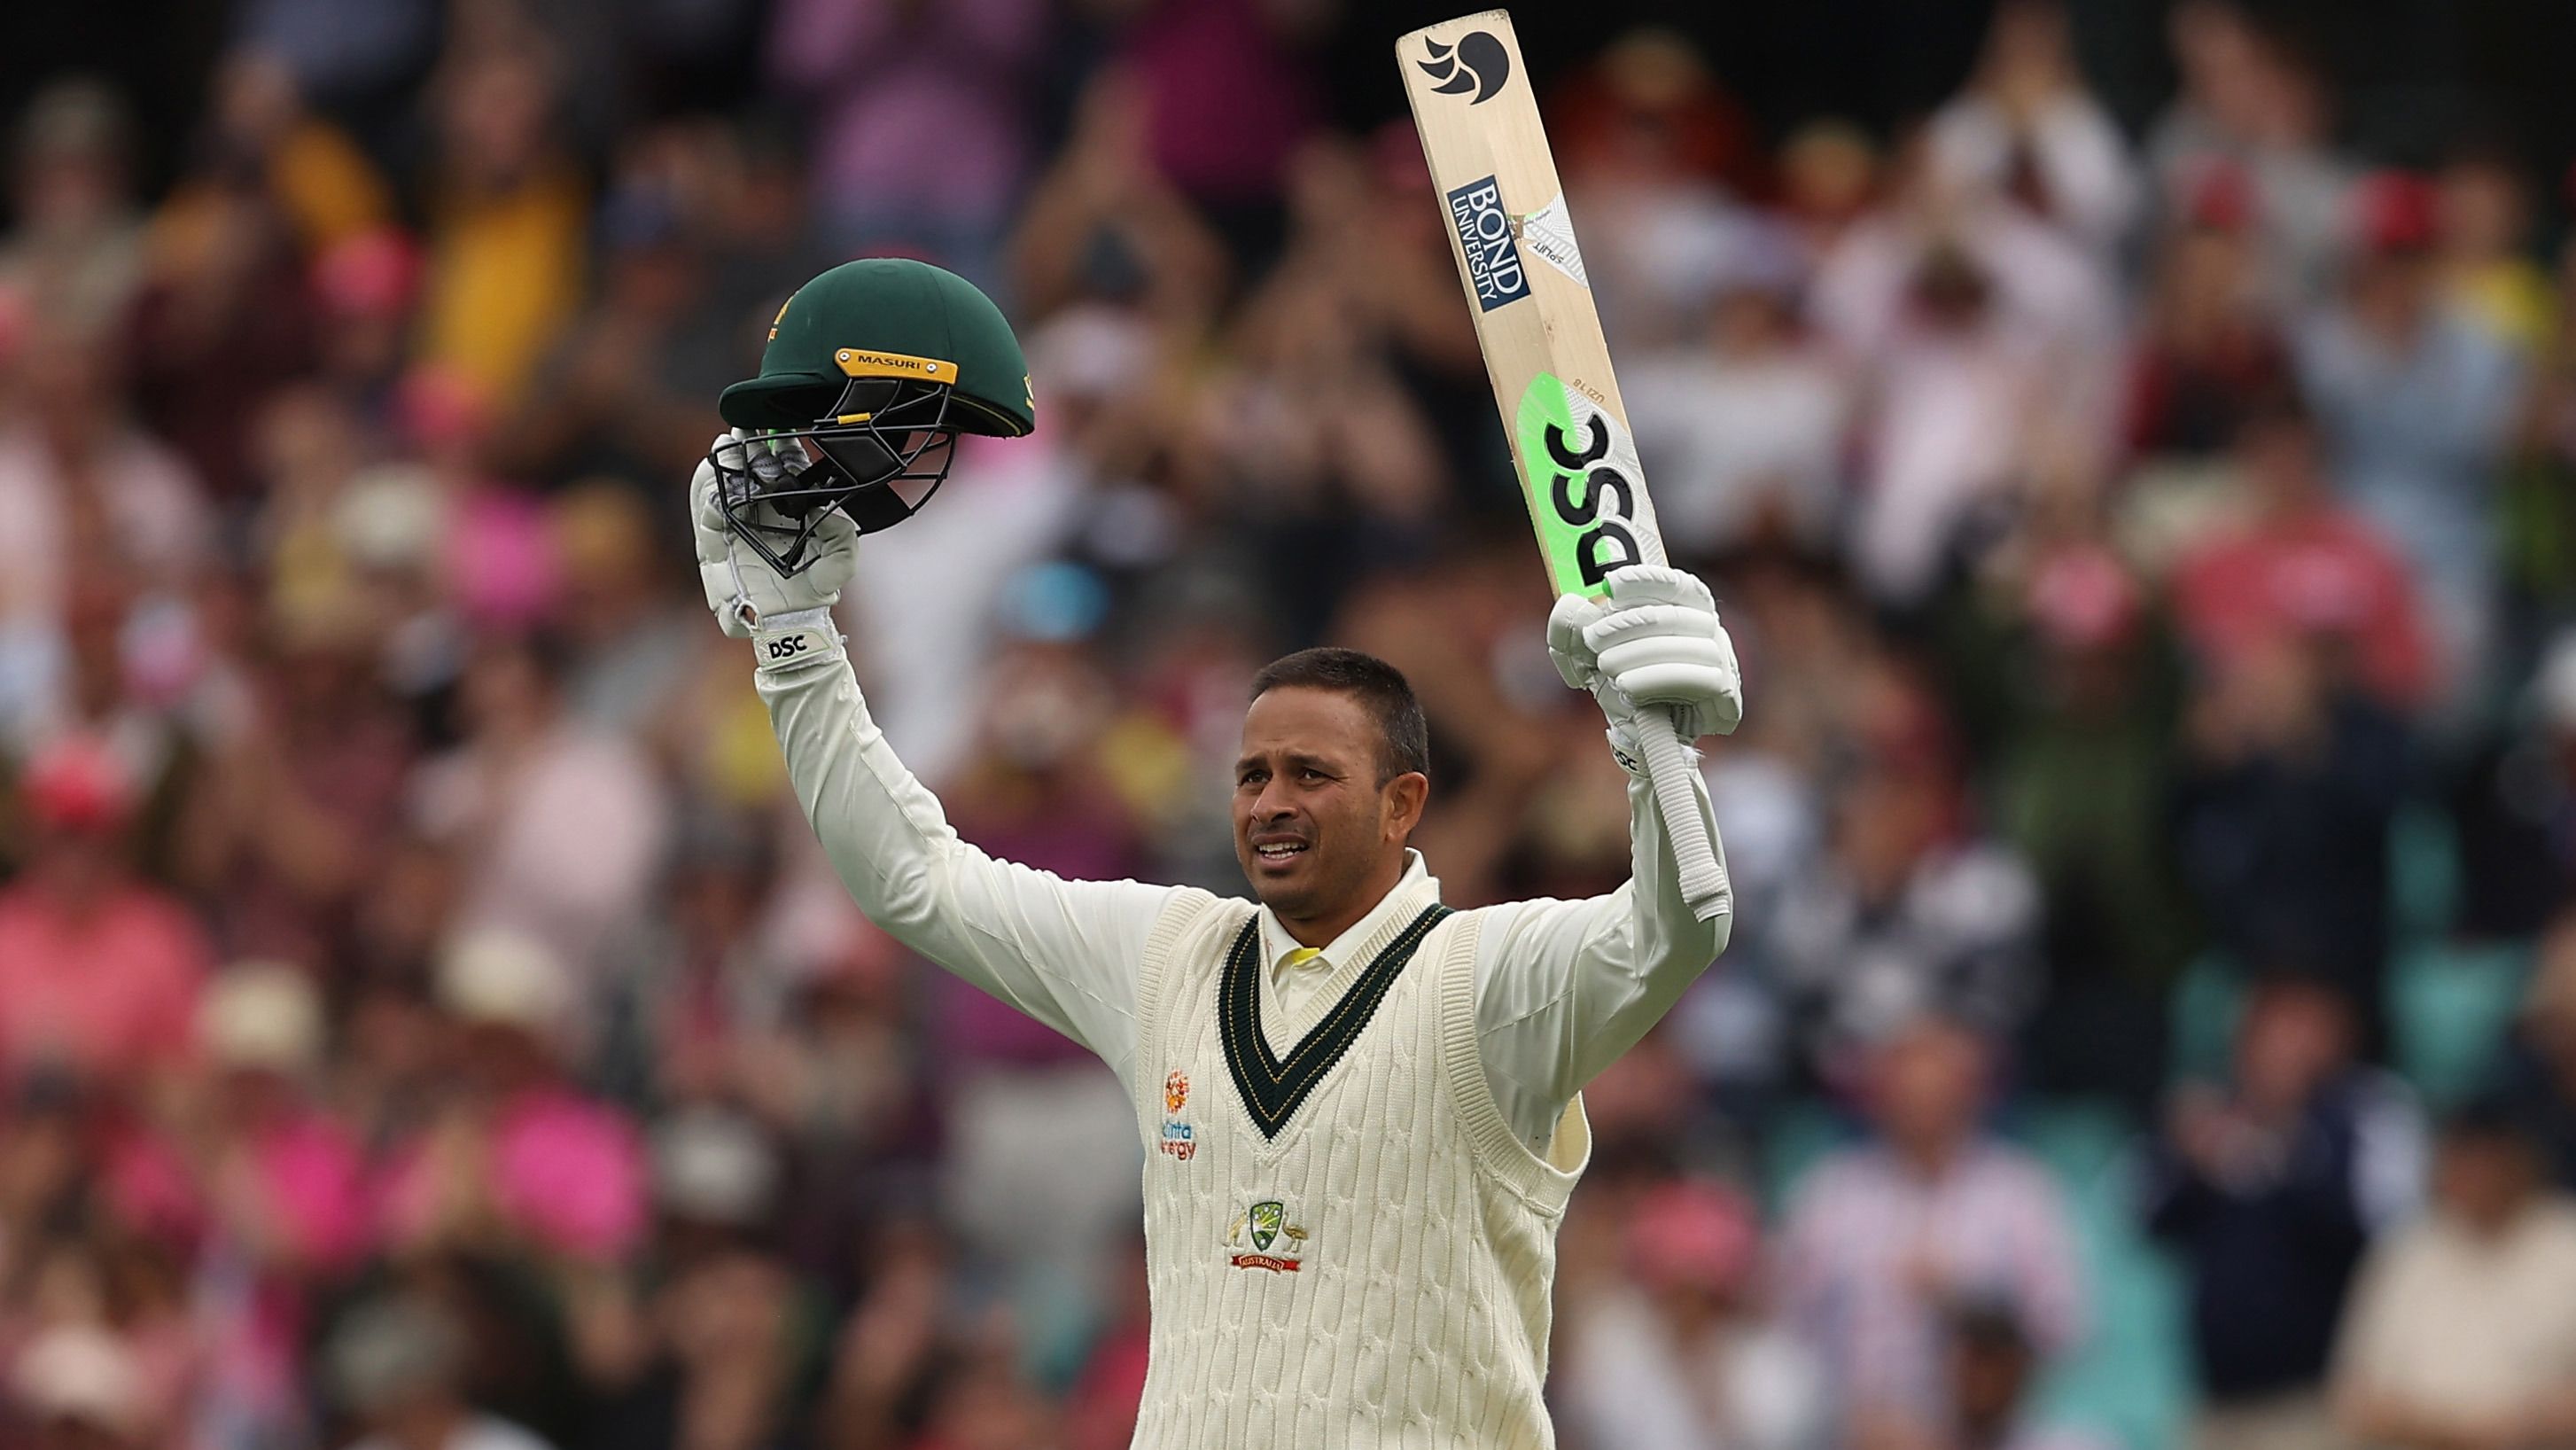 EXCLUSIVE: Usman Khawaja's career is a case of timing, says former skipper Mark Taylor